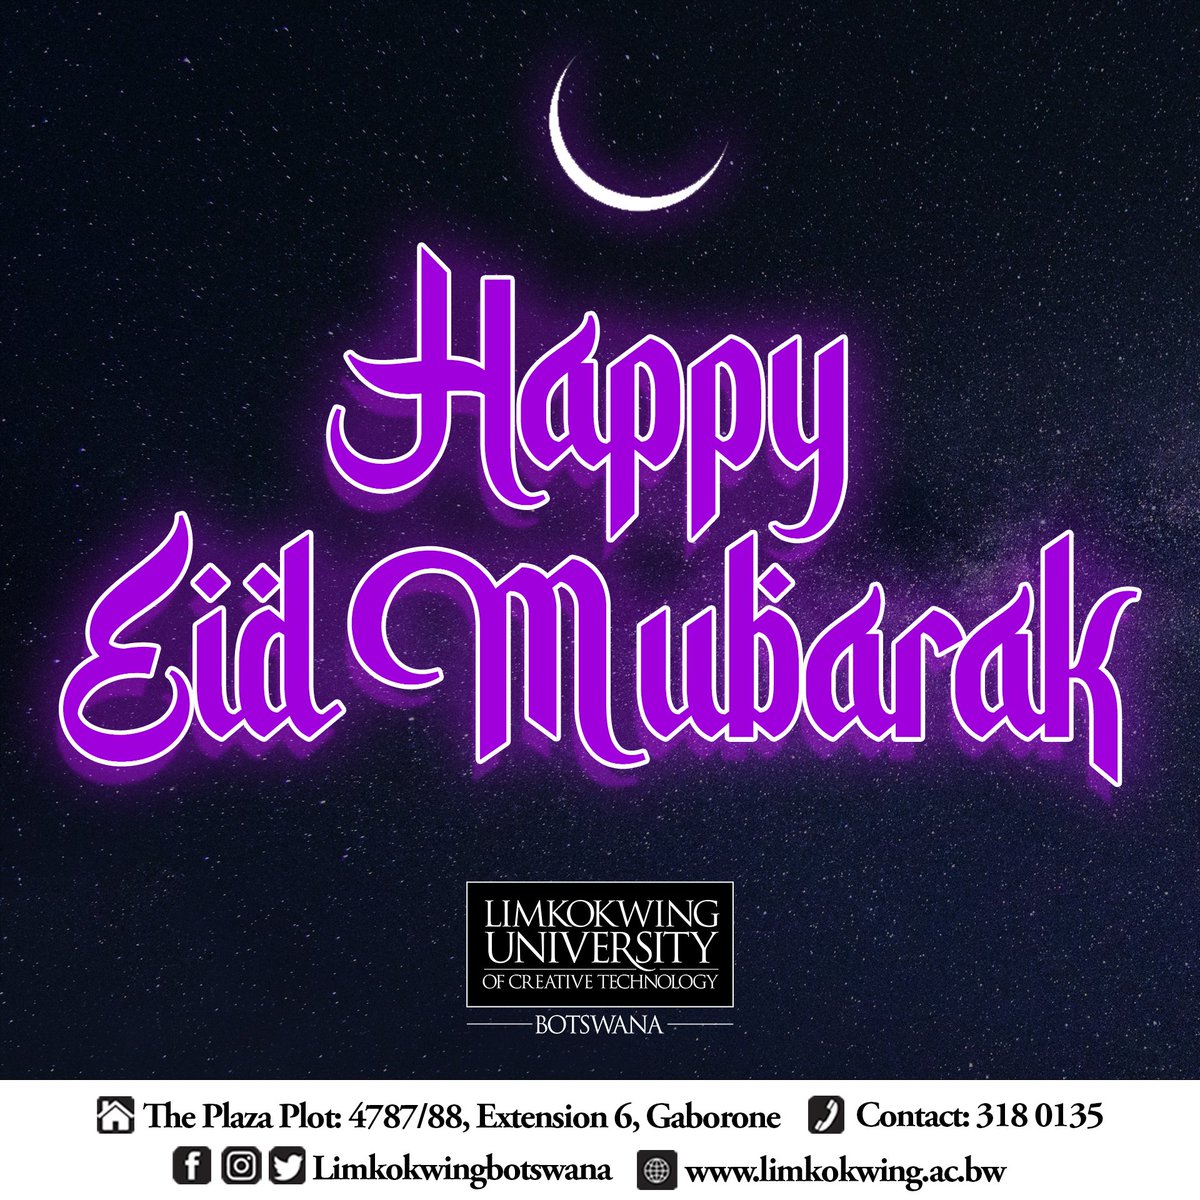 On this auspicious occasion of Eid, may Allah bless you with happiness, peace, and prosperity.

#eidmubarak
#limkokwinguniversity
#DesignYourFuture
#Intake2024